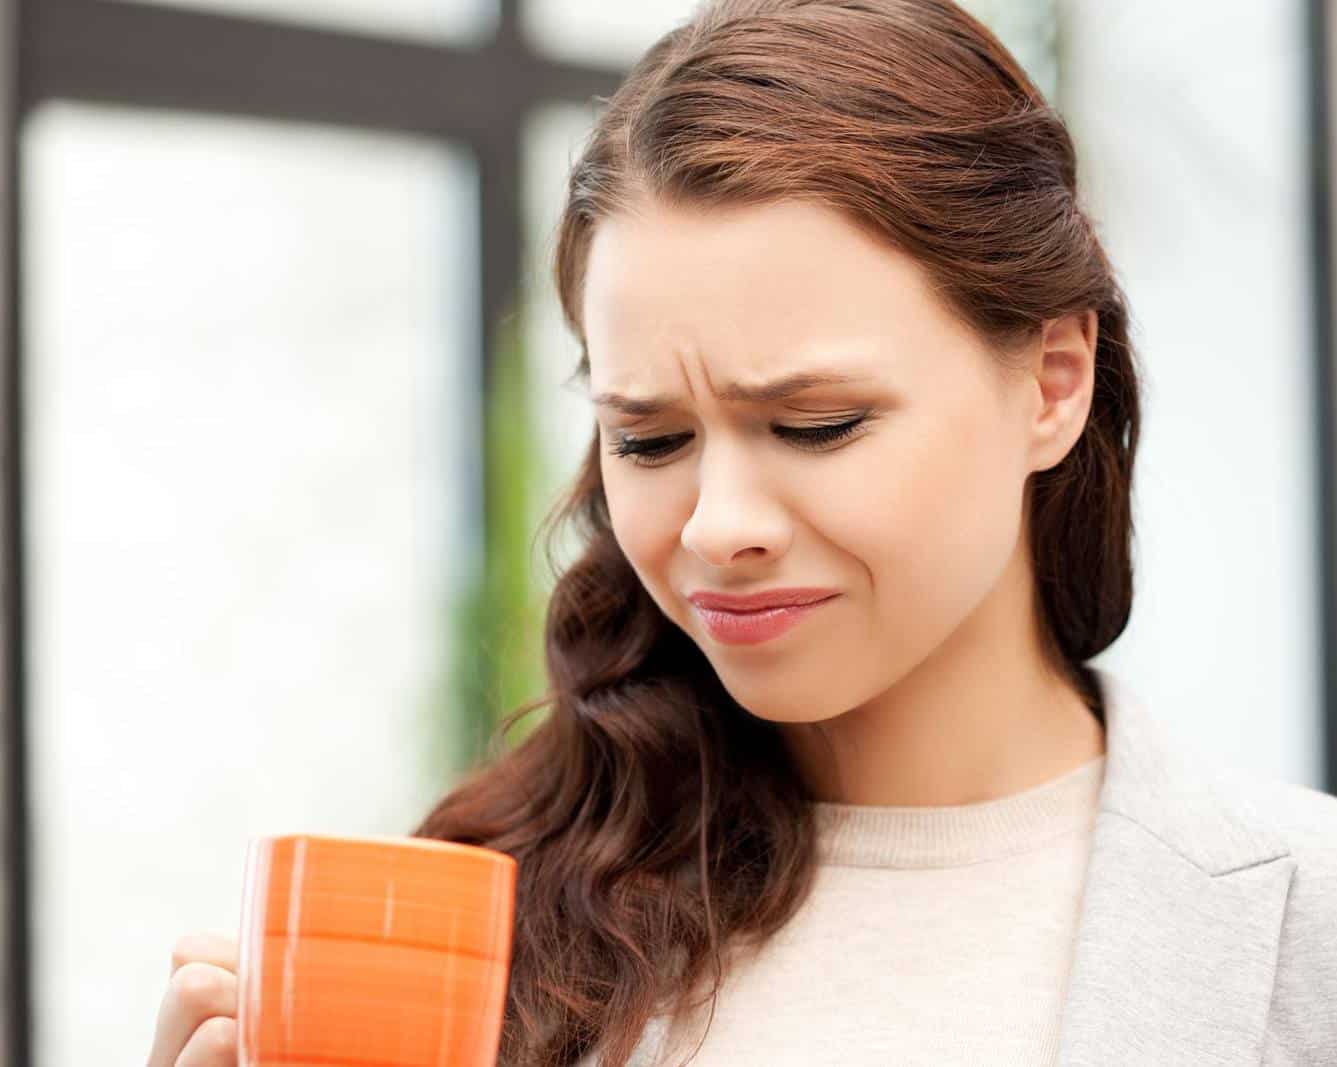 Concerned look on woman's face while looking into mug